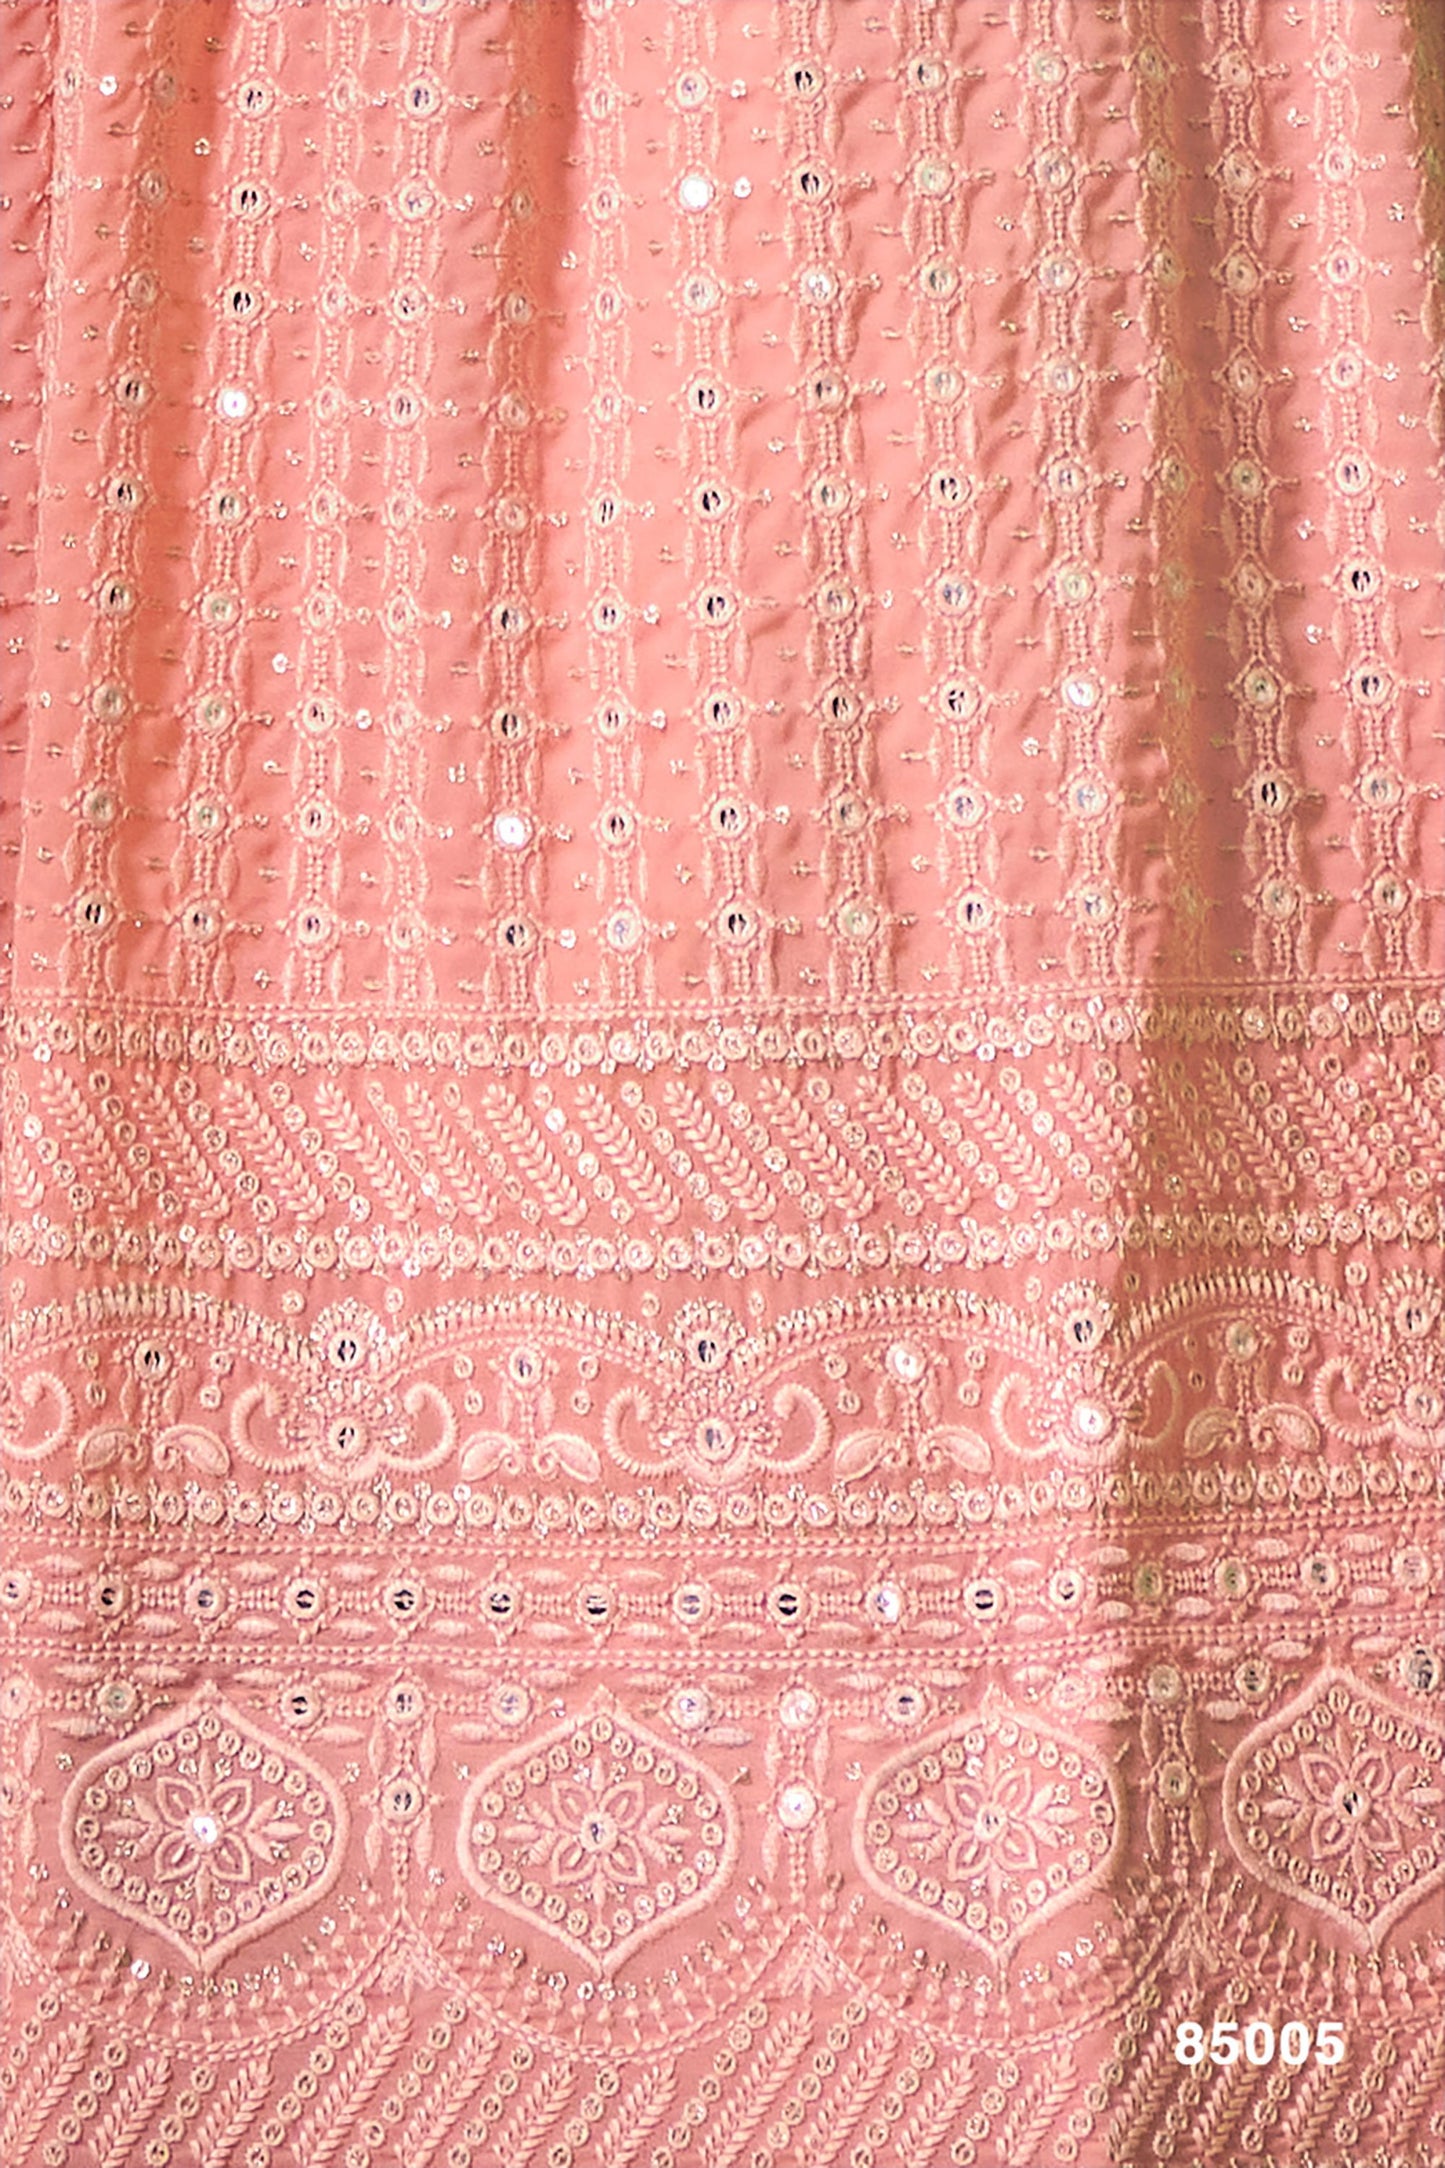 Peach Pakistani Georgette Lehenga Choli For Indian Festivals & Weddings - Sequence Embroidery Work, Thread Embroidery Work,